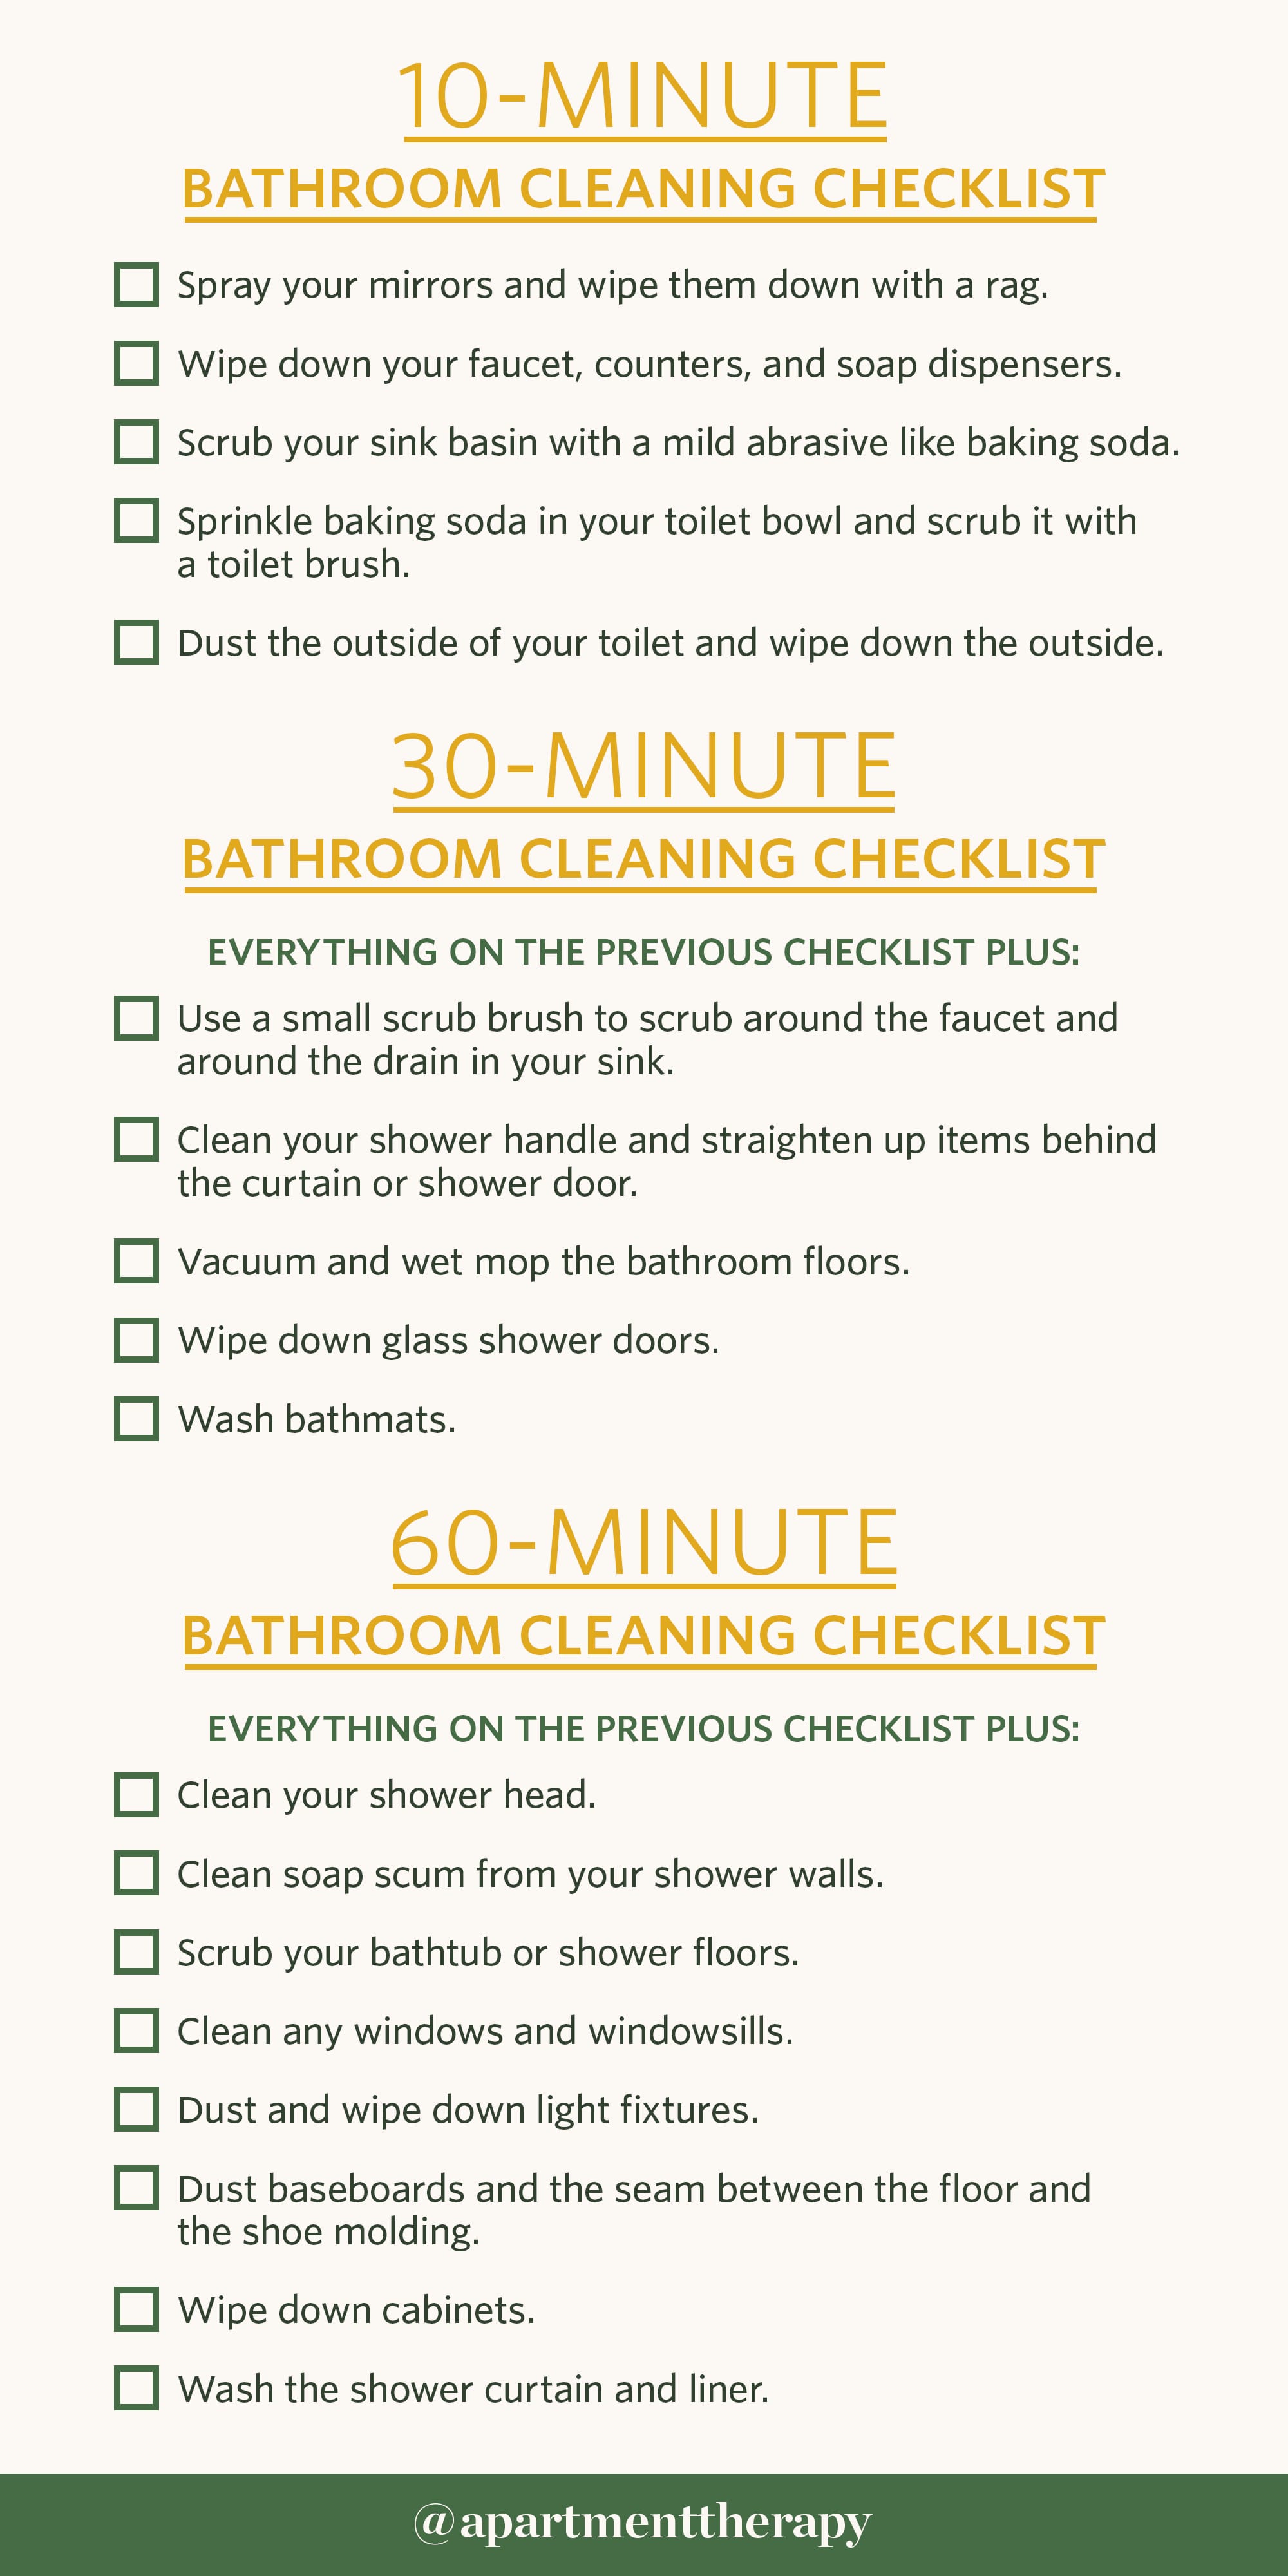 Bathroom Cleaning Checklist for Kids